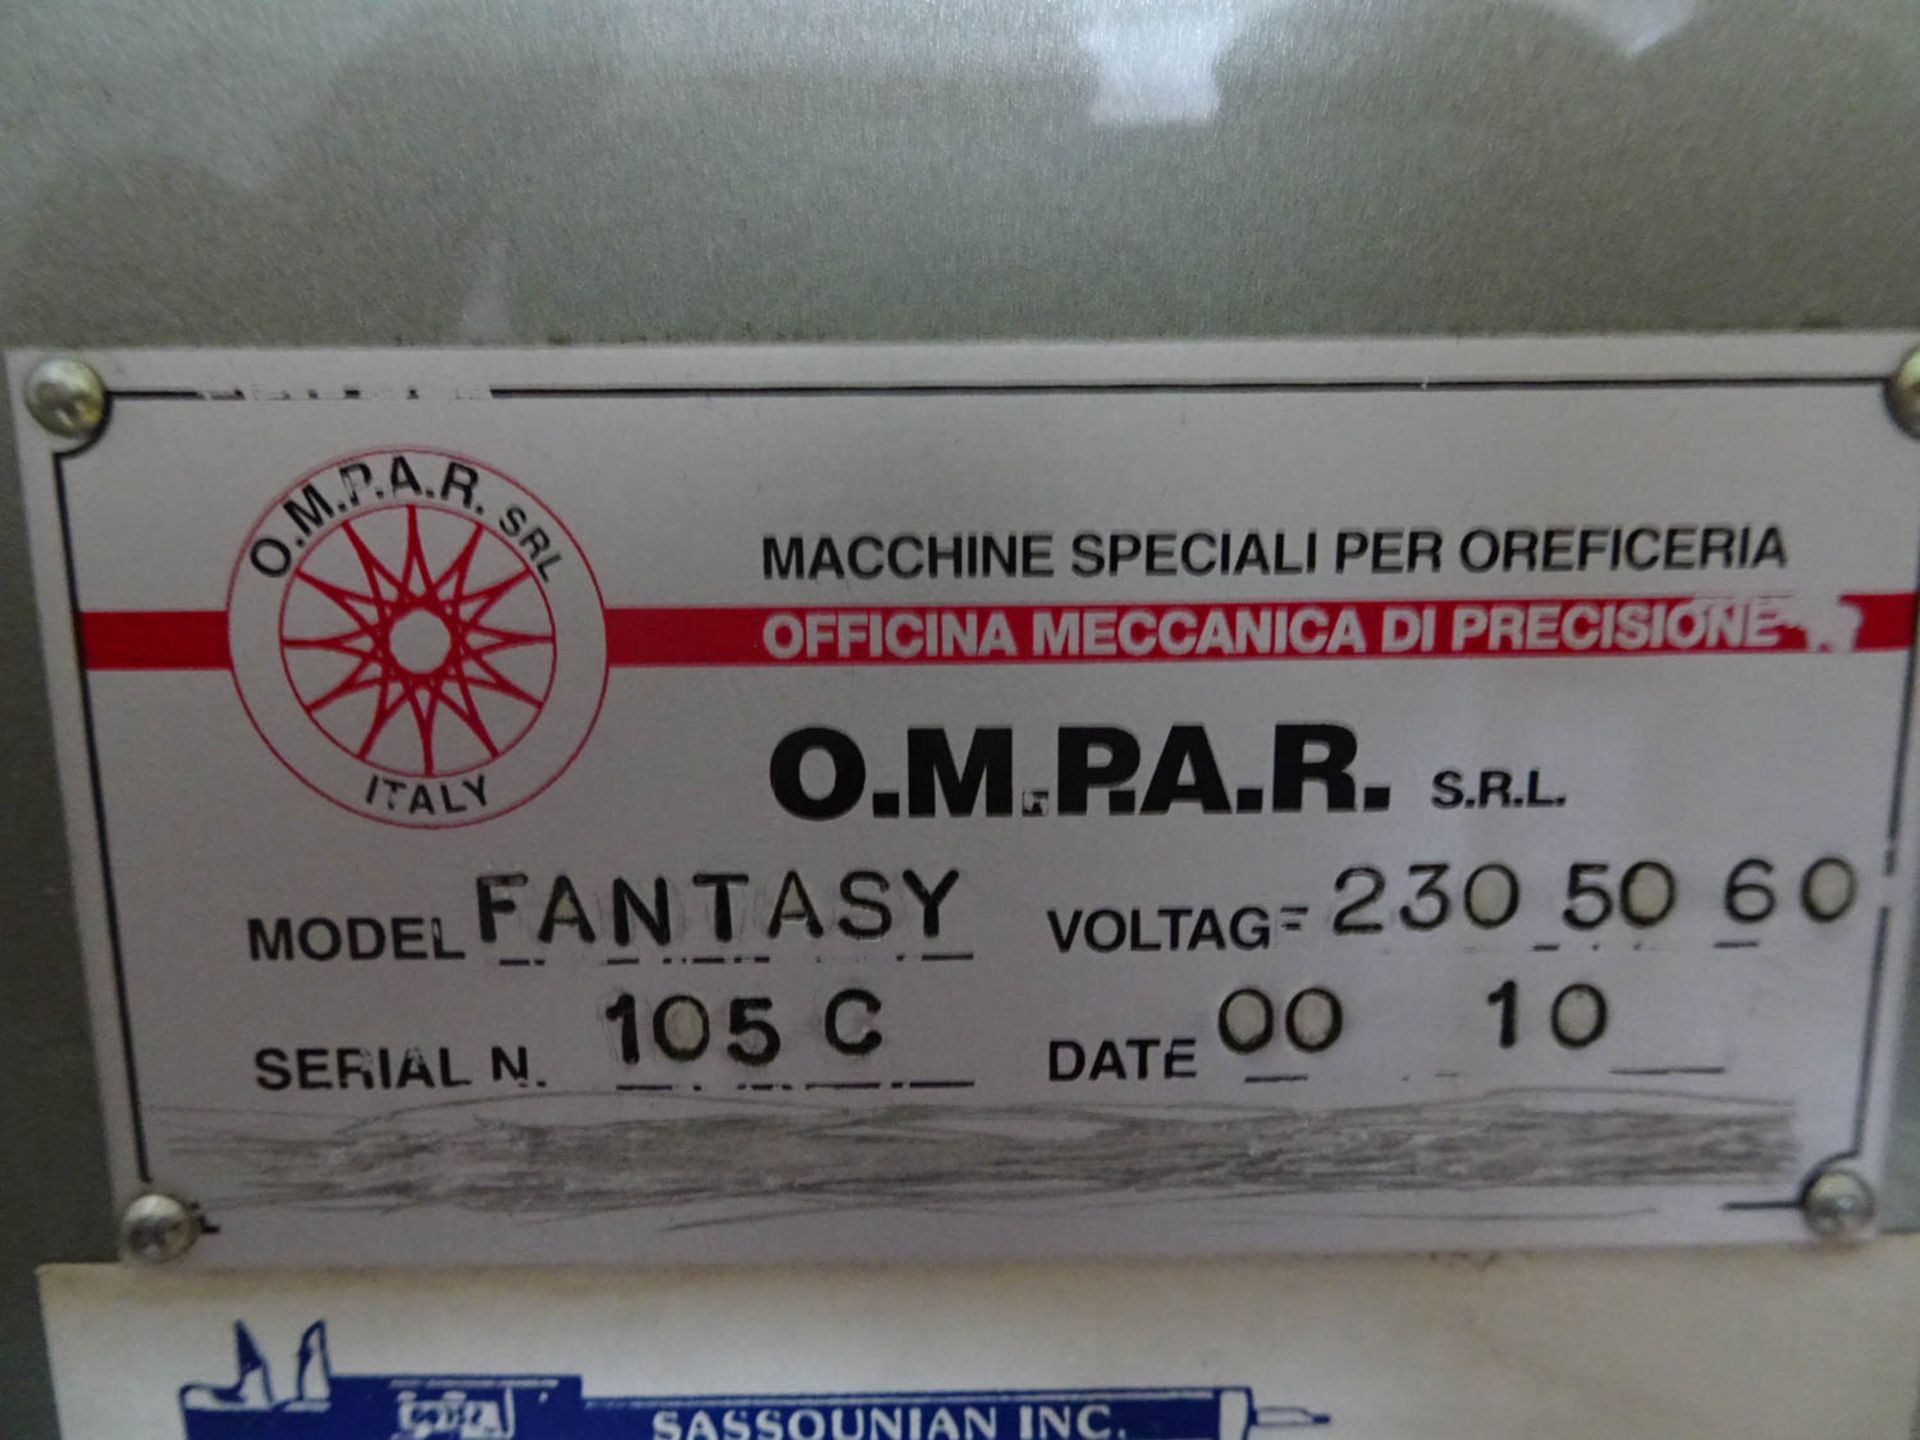 OMPAR MDL. RA (ITALY) (CE) FANTASY ELECTRONIC DIAMOND FACETING / CUTTING MACHINE, DOUBLE HEAD, 230 - Image 16 of 16